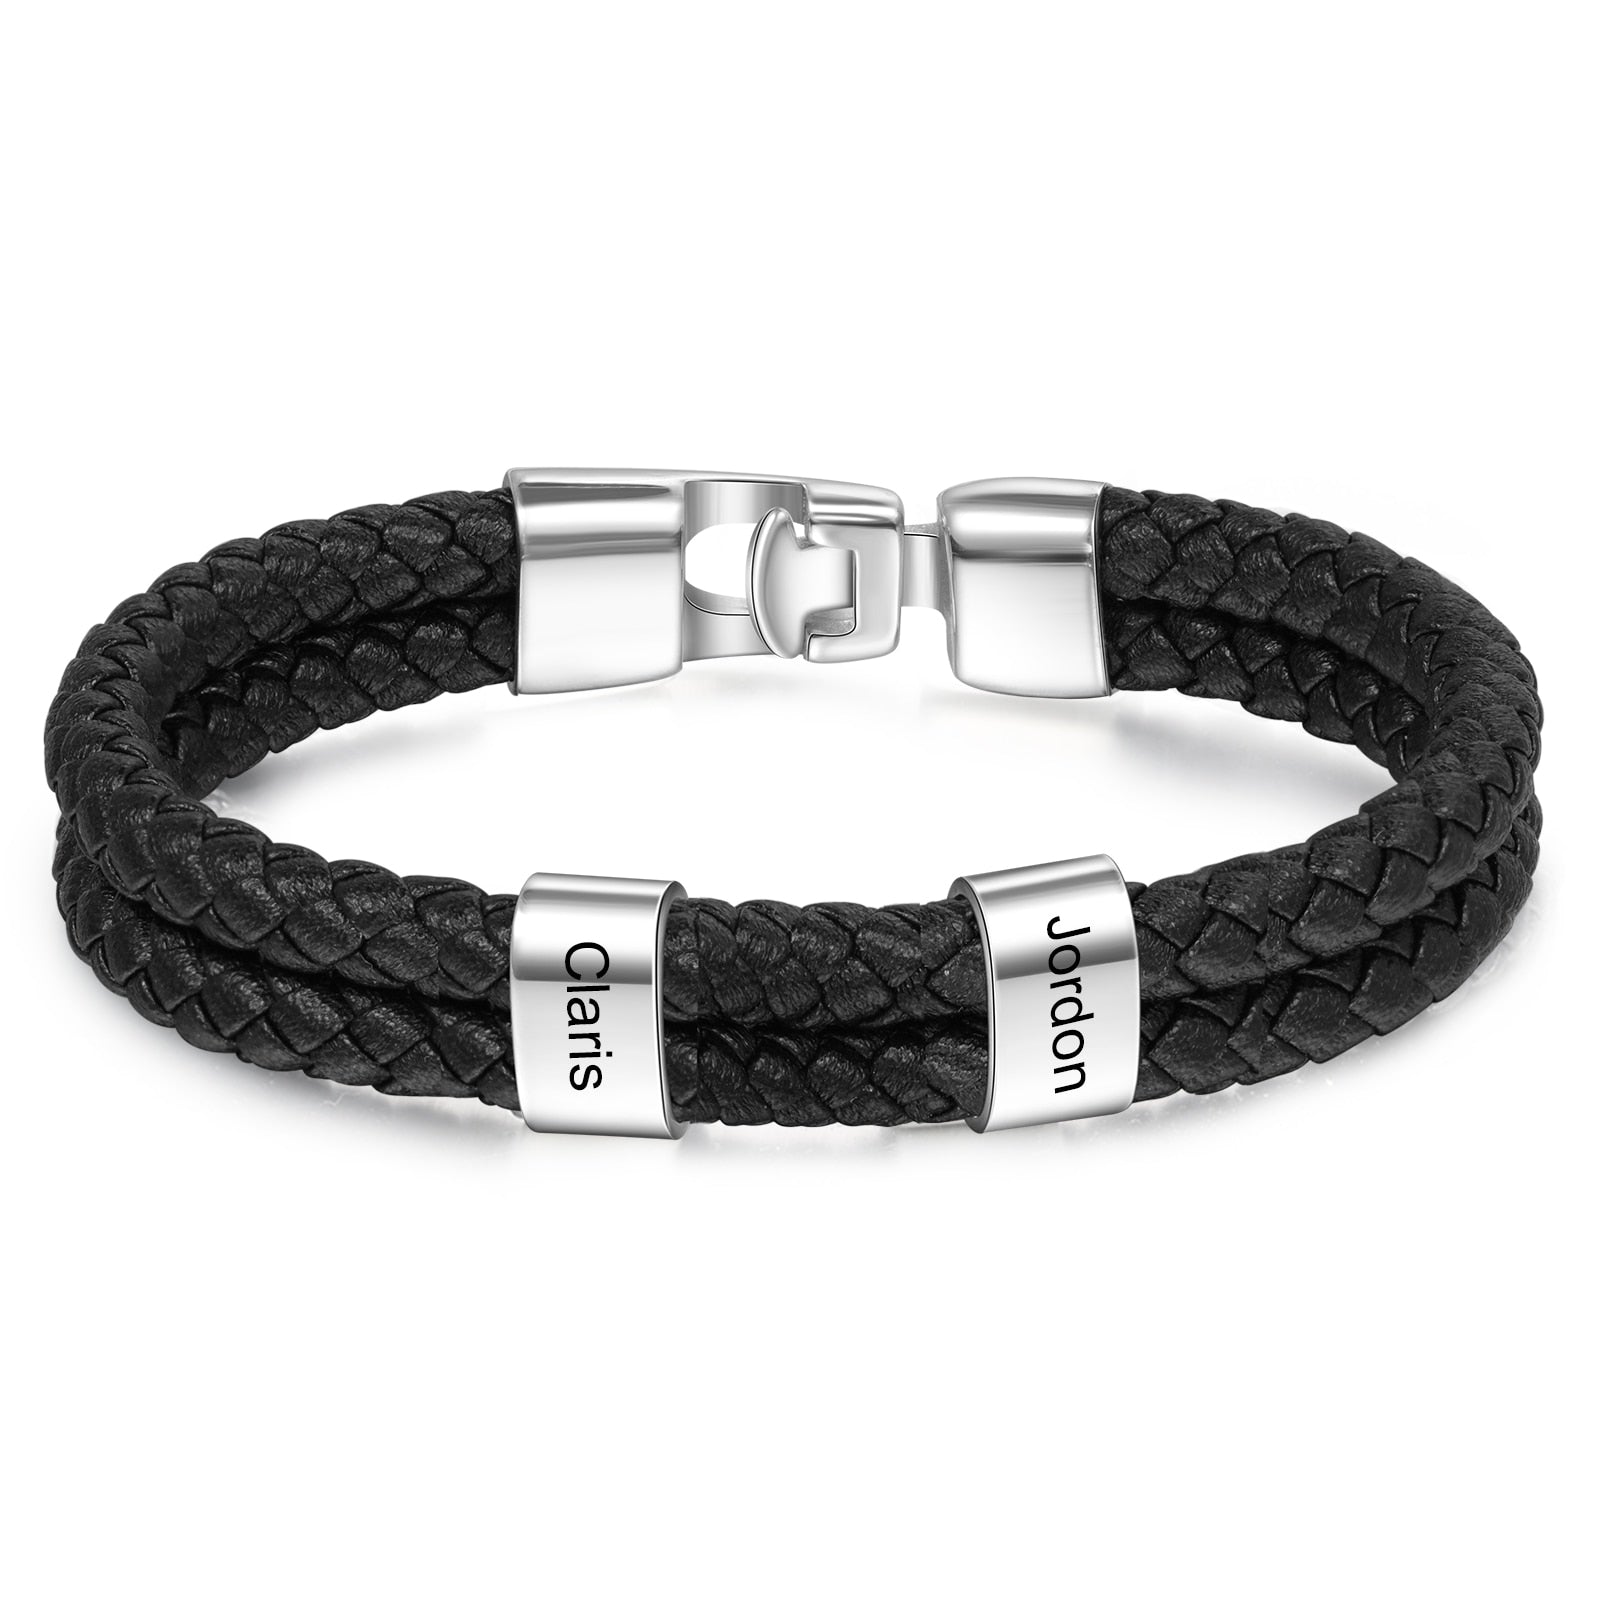 JewelOra Personalized Engraved Family Name Beads Bracelets Black Braided Leather Stainless Steel Bracelets for Men Fathers